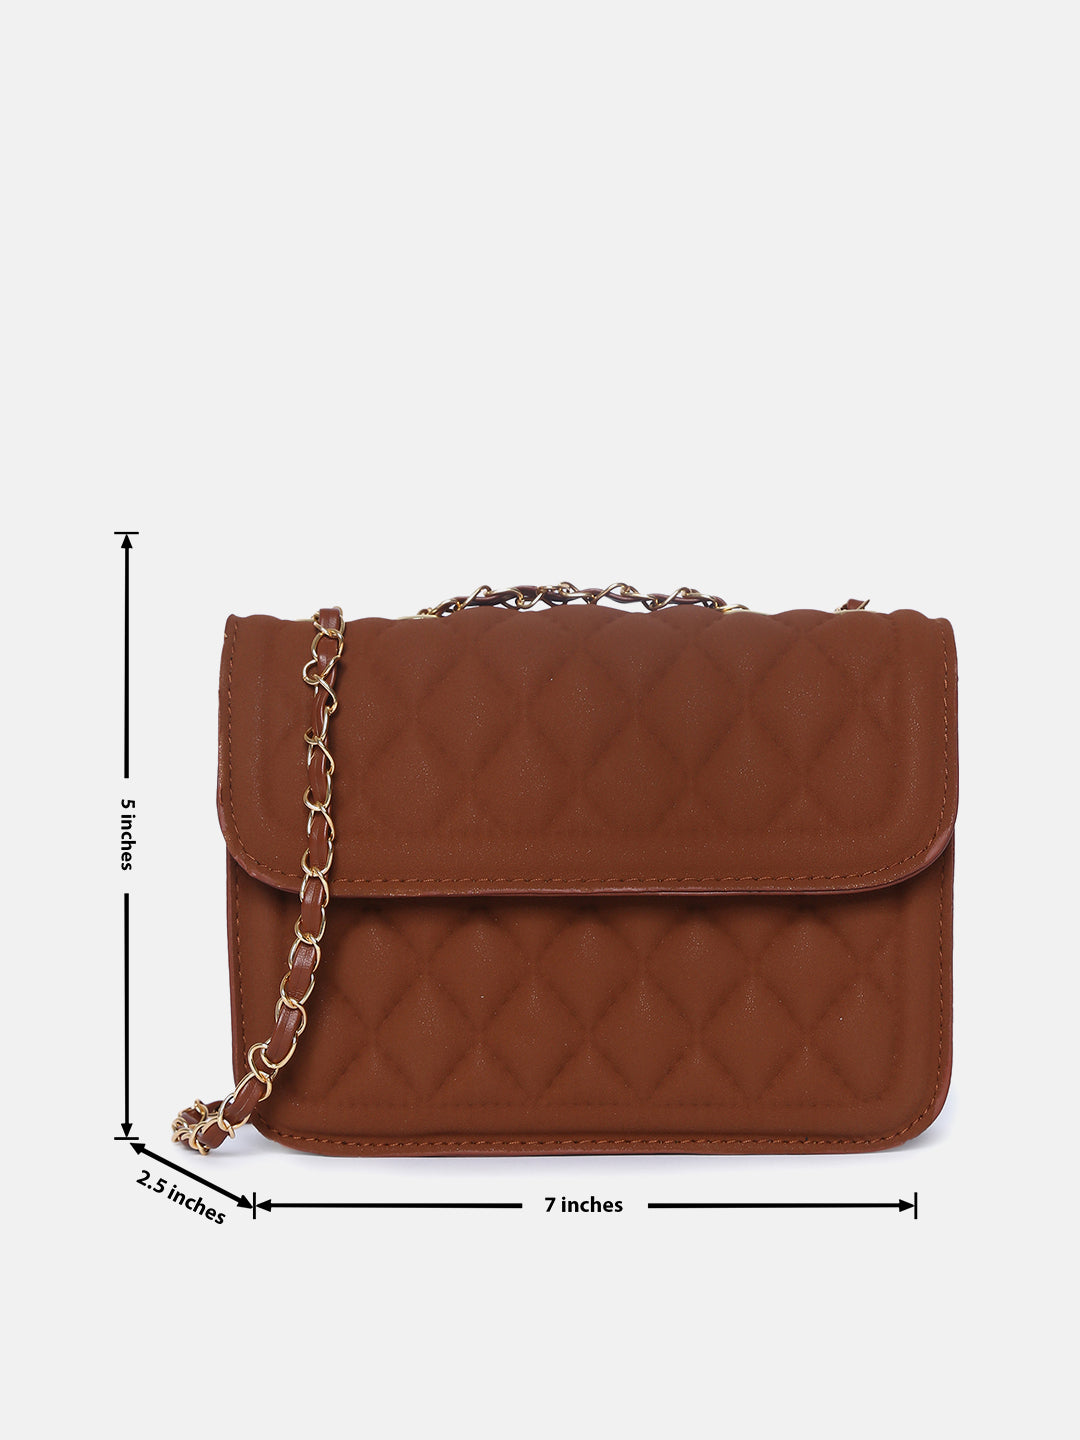 BROWN TEXTURED VEGAN LEATHER STRUCTURED SHOULDER BAG WITH QUILTED